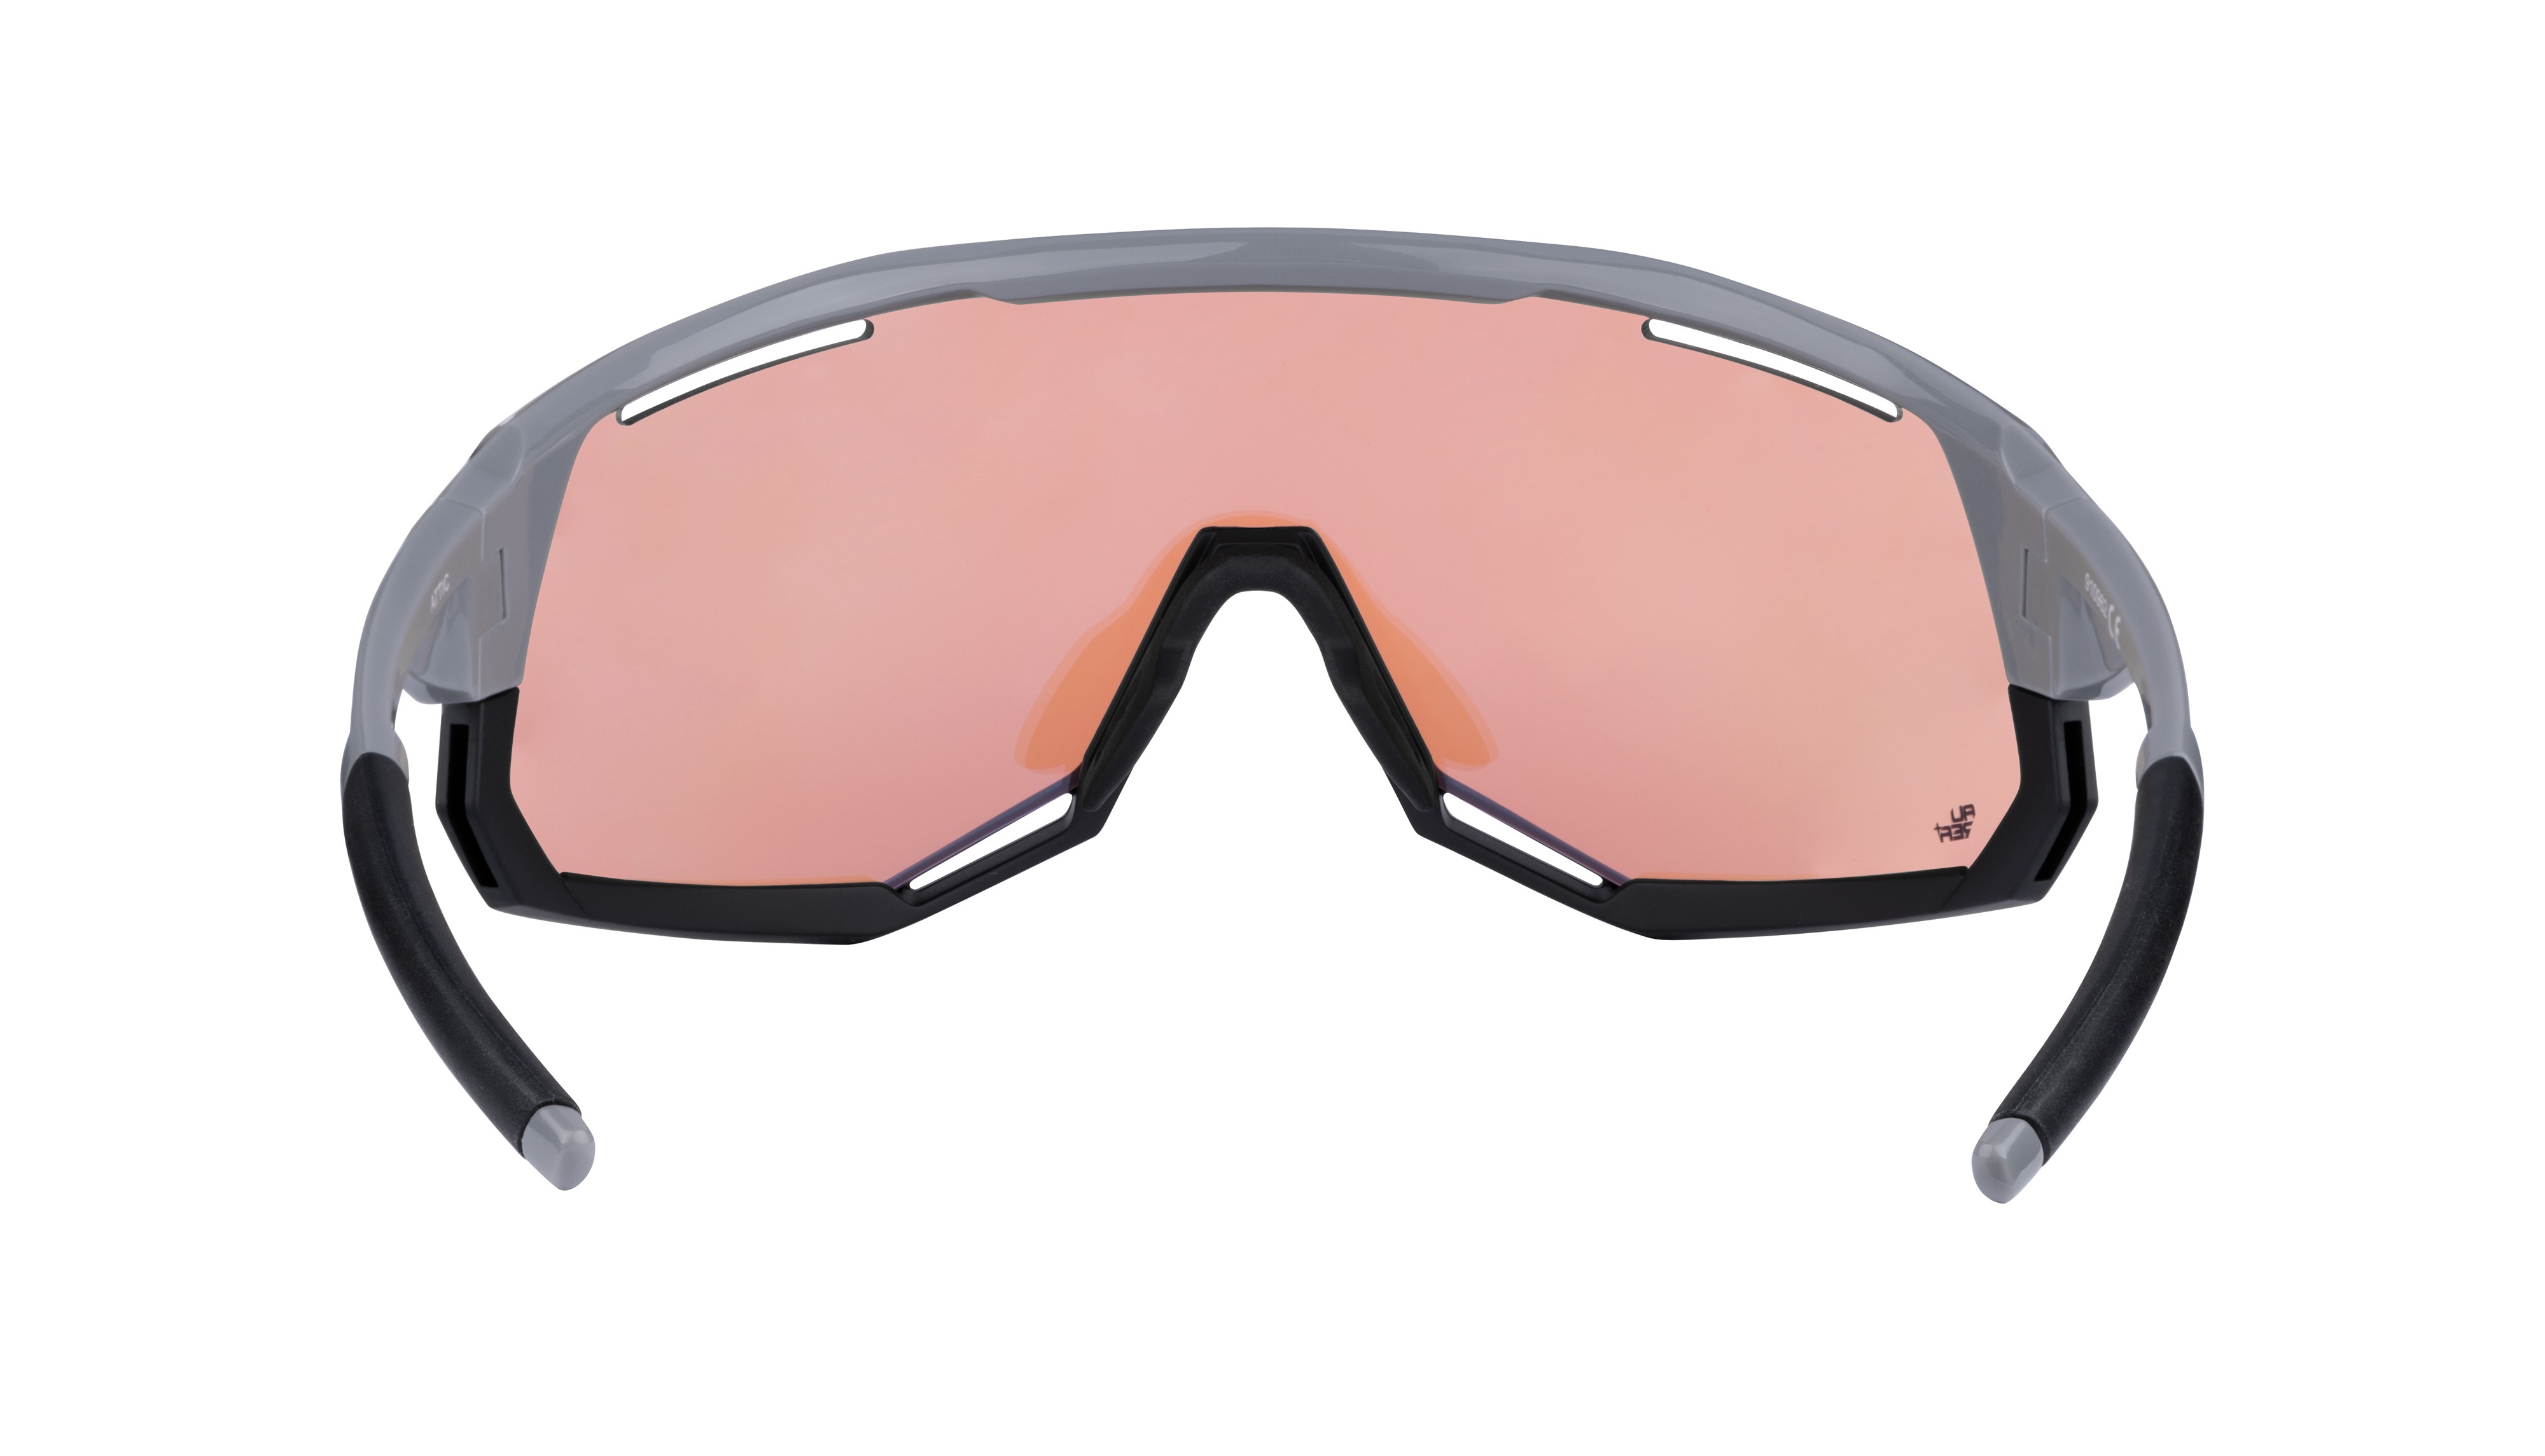 FORCE ATTIC Sports glasses with interchangeable lenses, gray and black ...